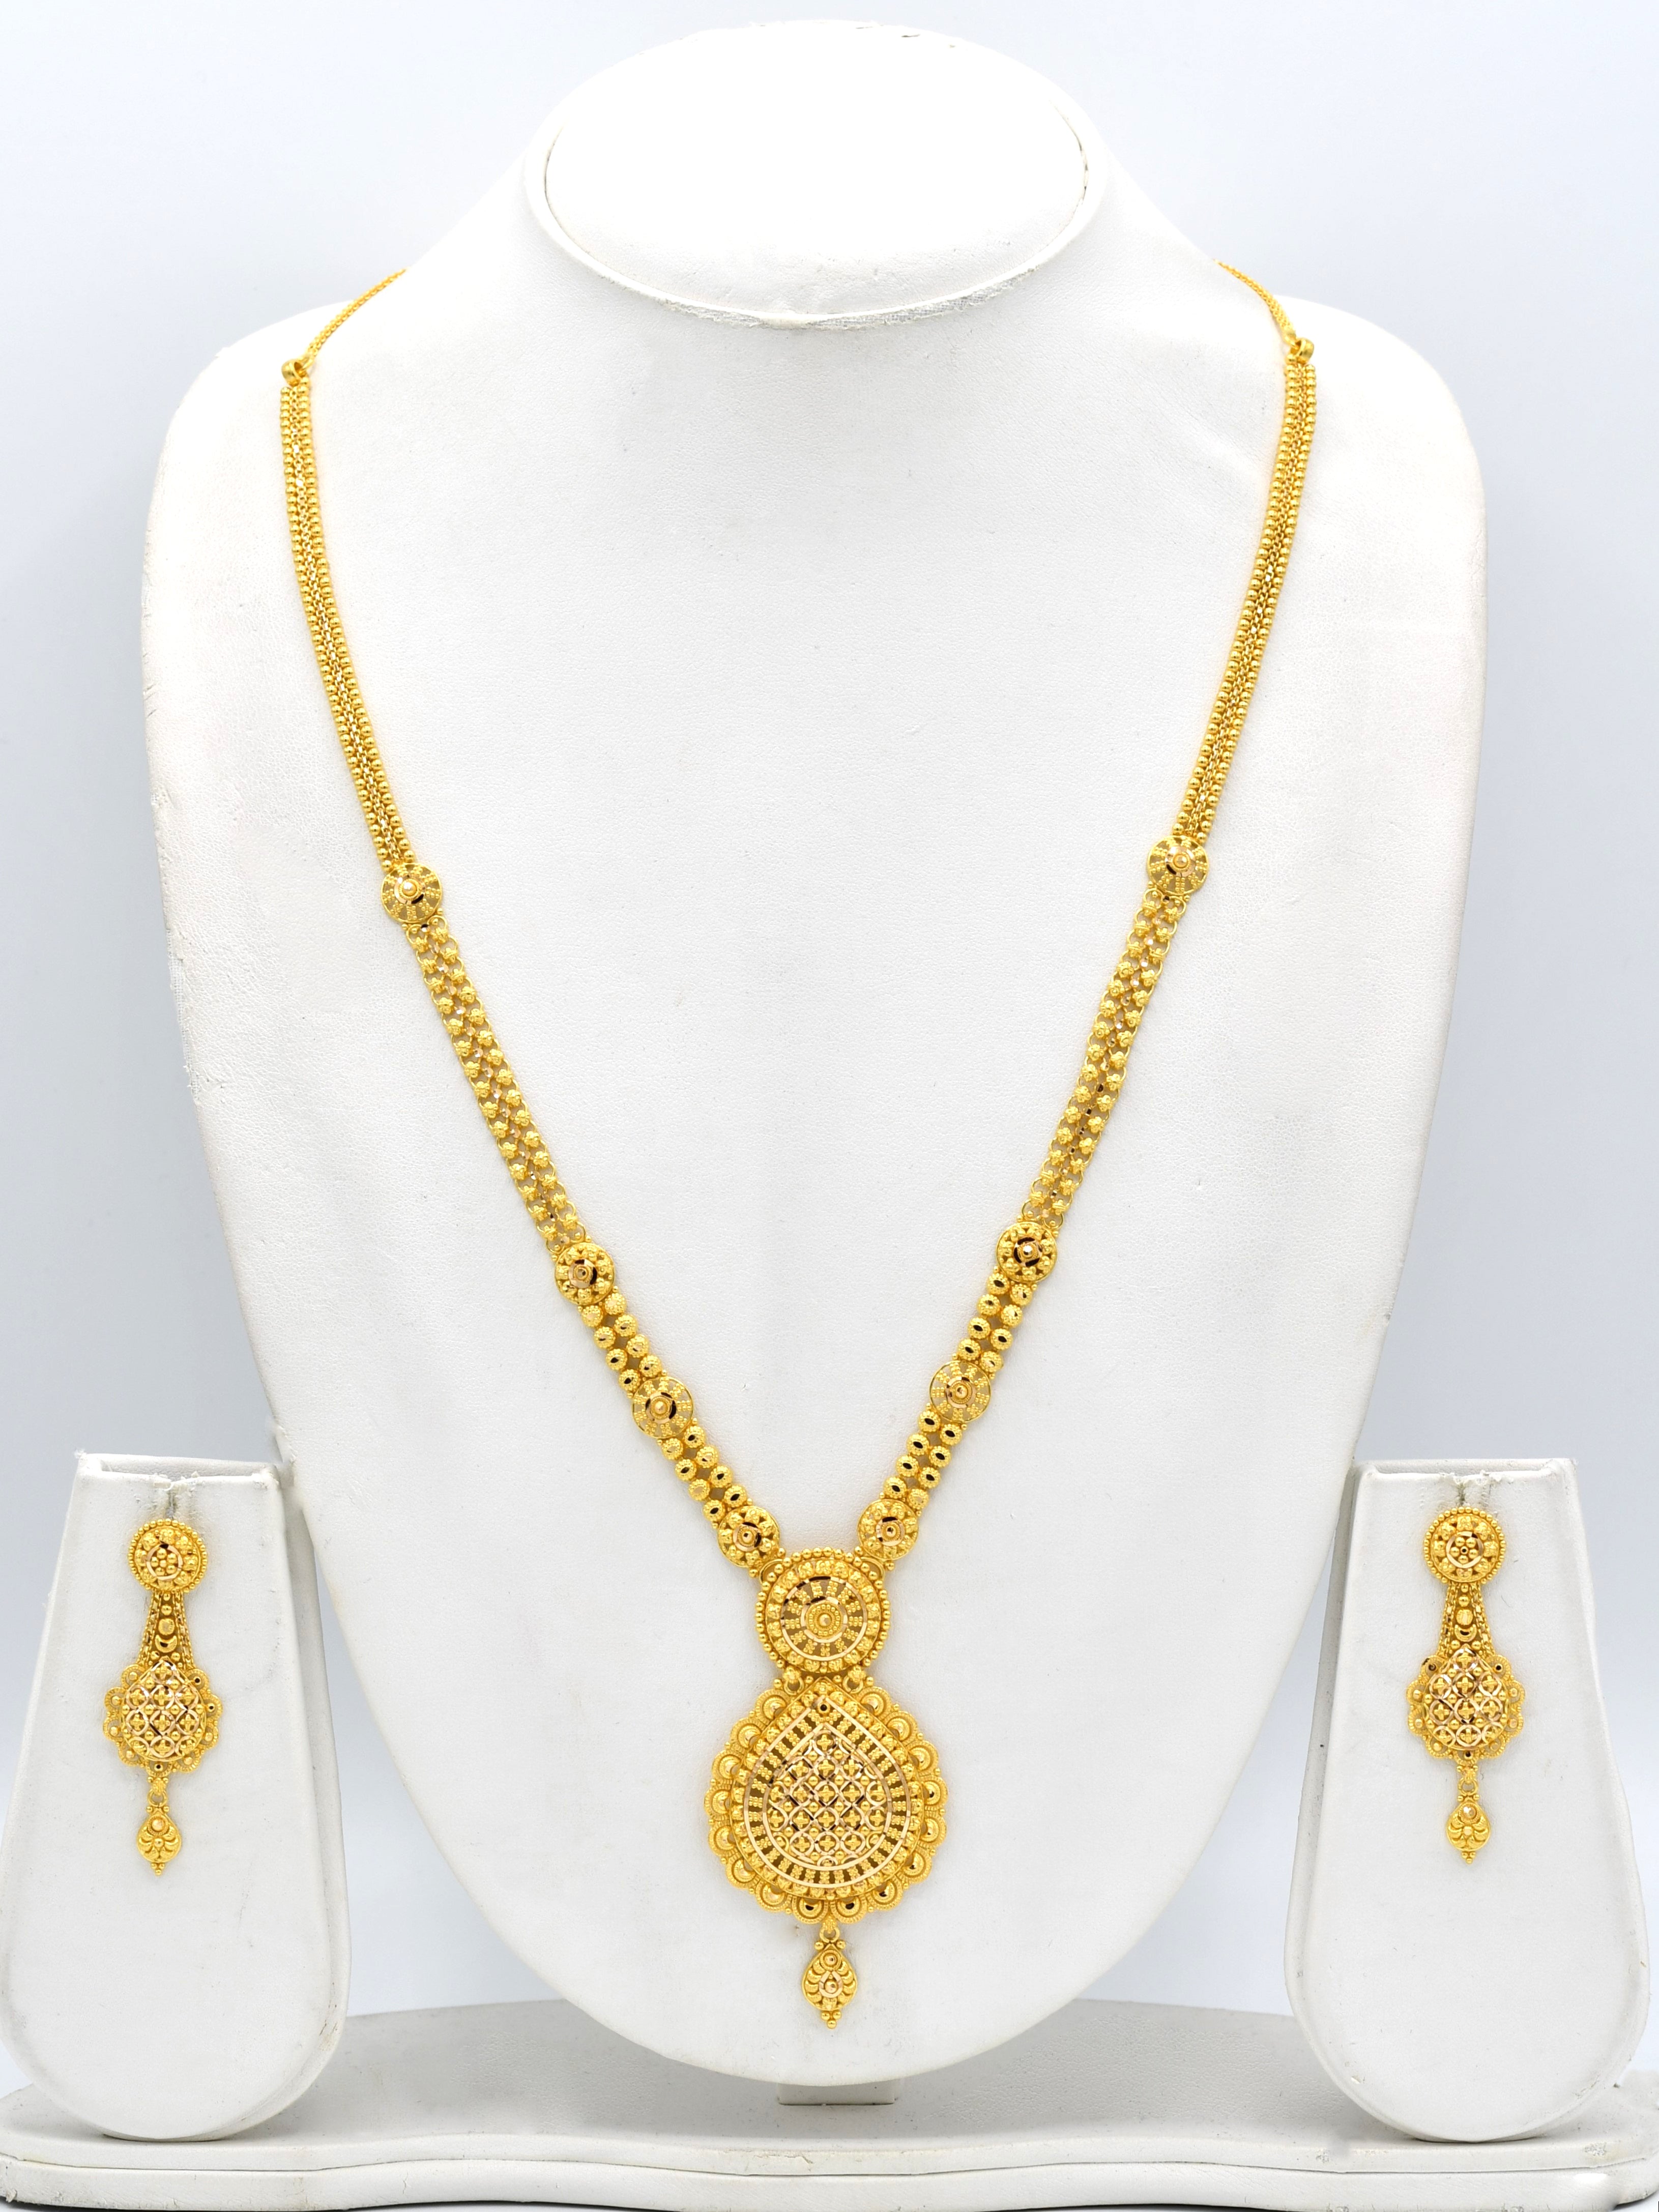 22ct Gold Long Necklace Set - Roop Darshan